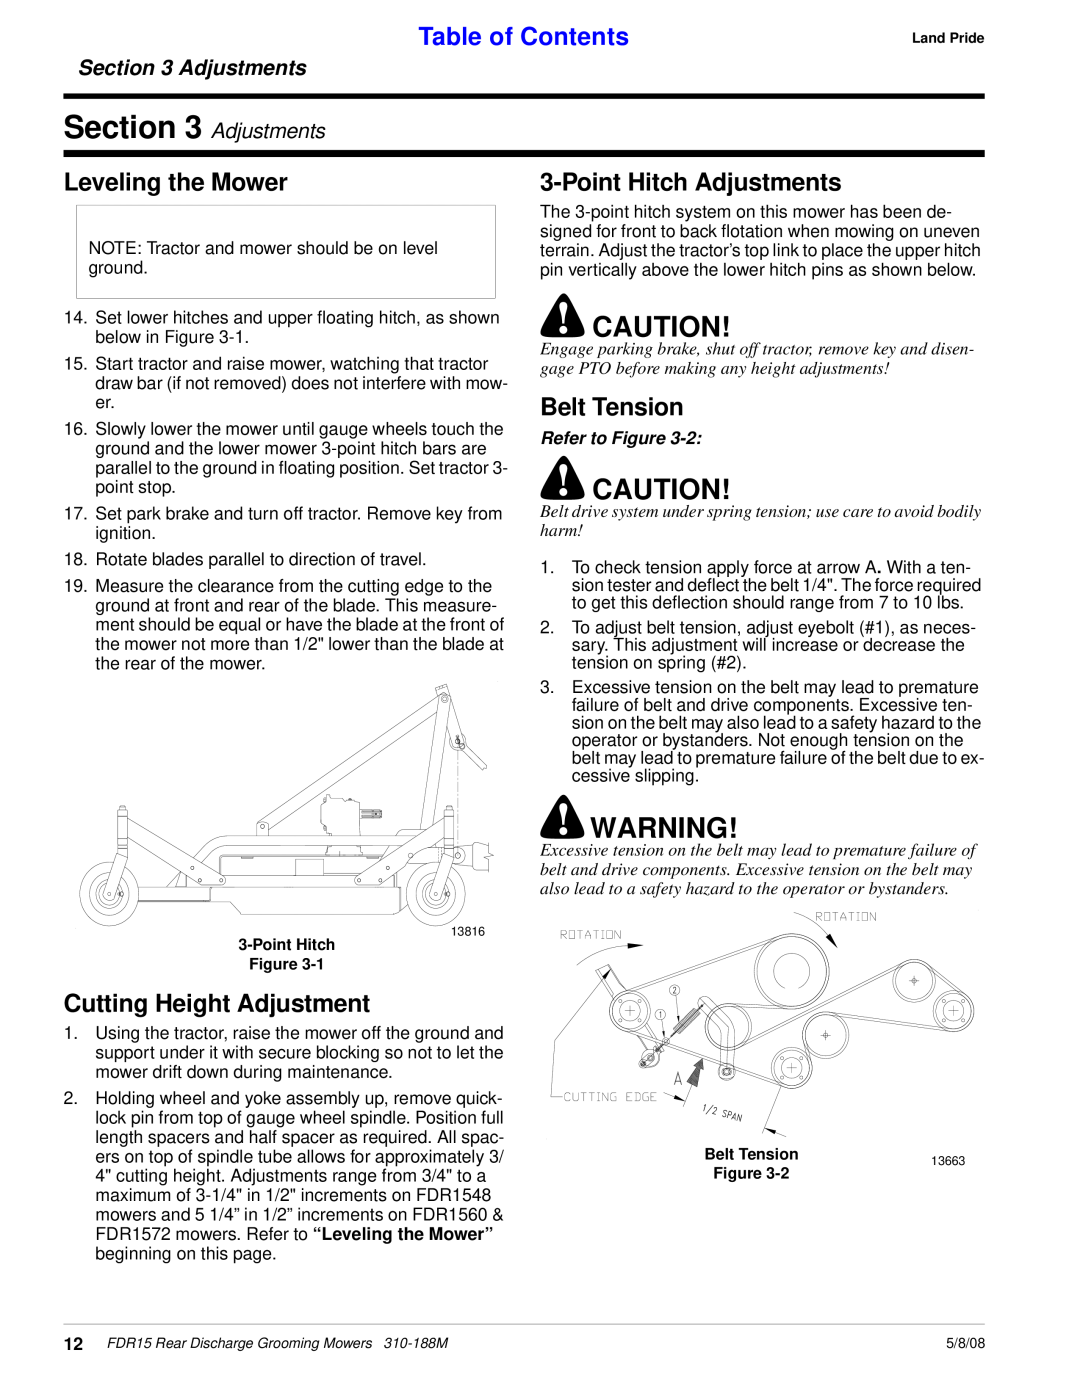 Land Pride FDR15 Leveling the Mower, Belt Tension, Cutting Height Adjustment, Point Hitch Adjustments, Table of Contents 